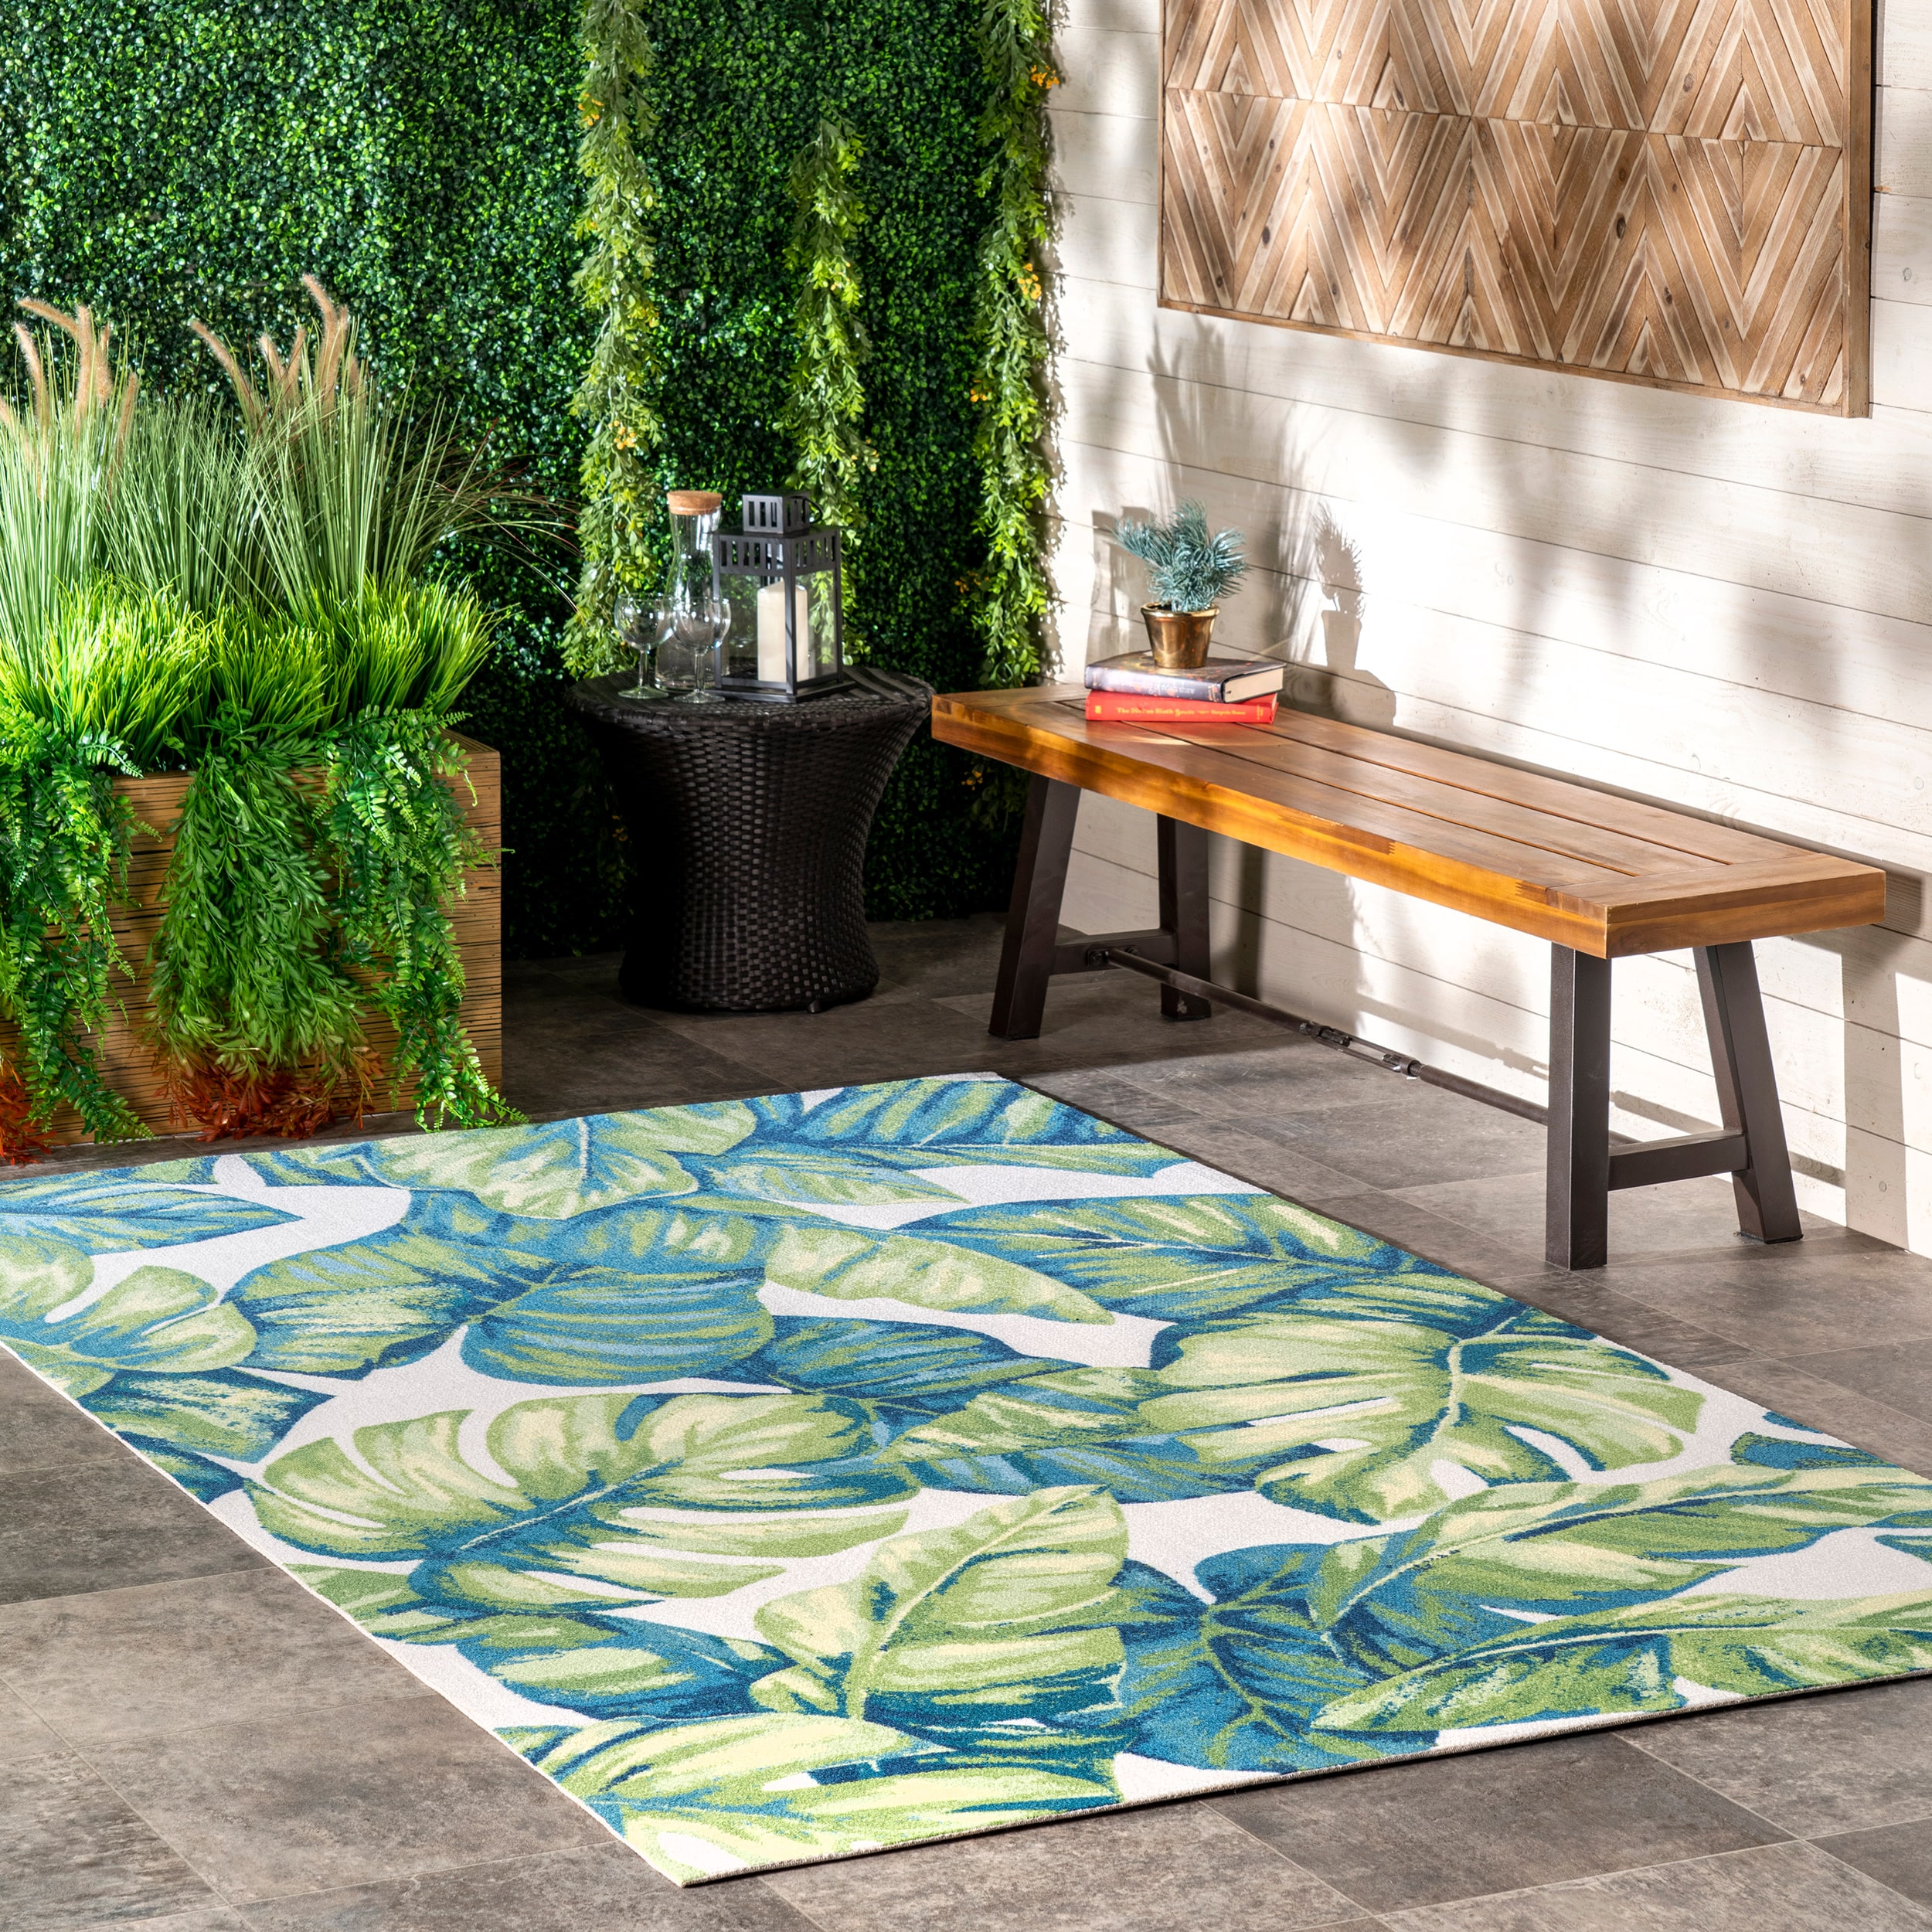 nuLOOM Oasis 2 x 3 Indoor/Outdoor Floral/Botanical Area Rug in the